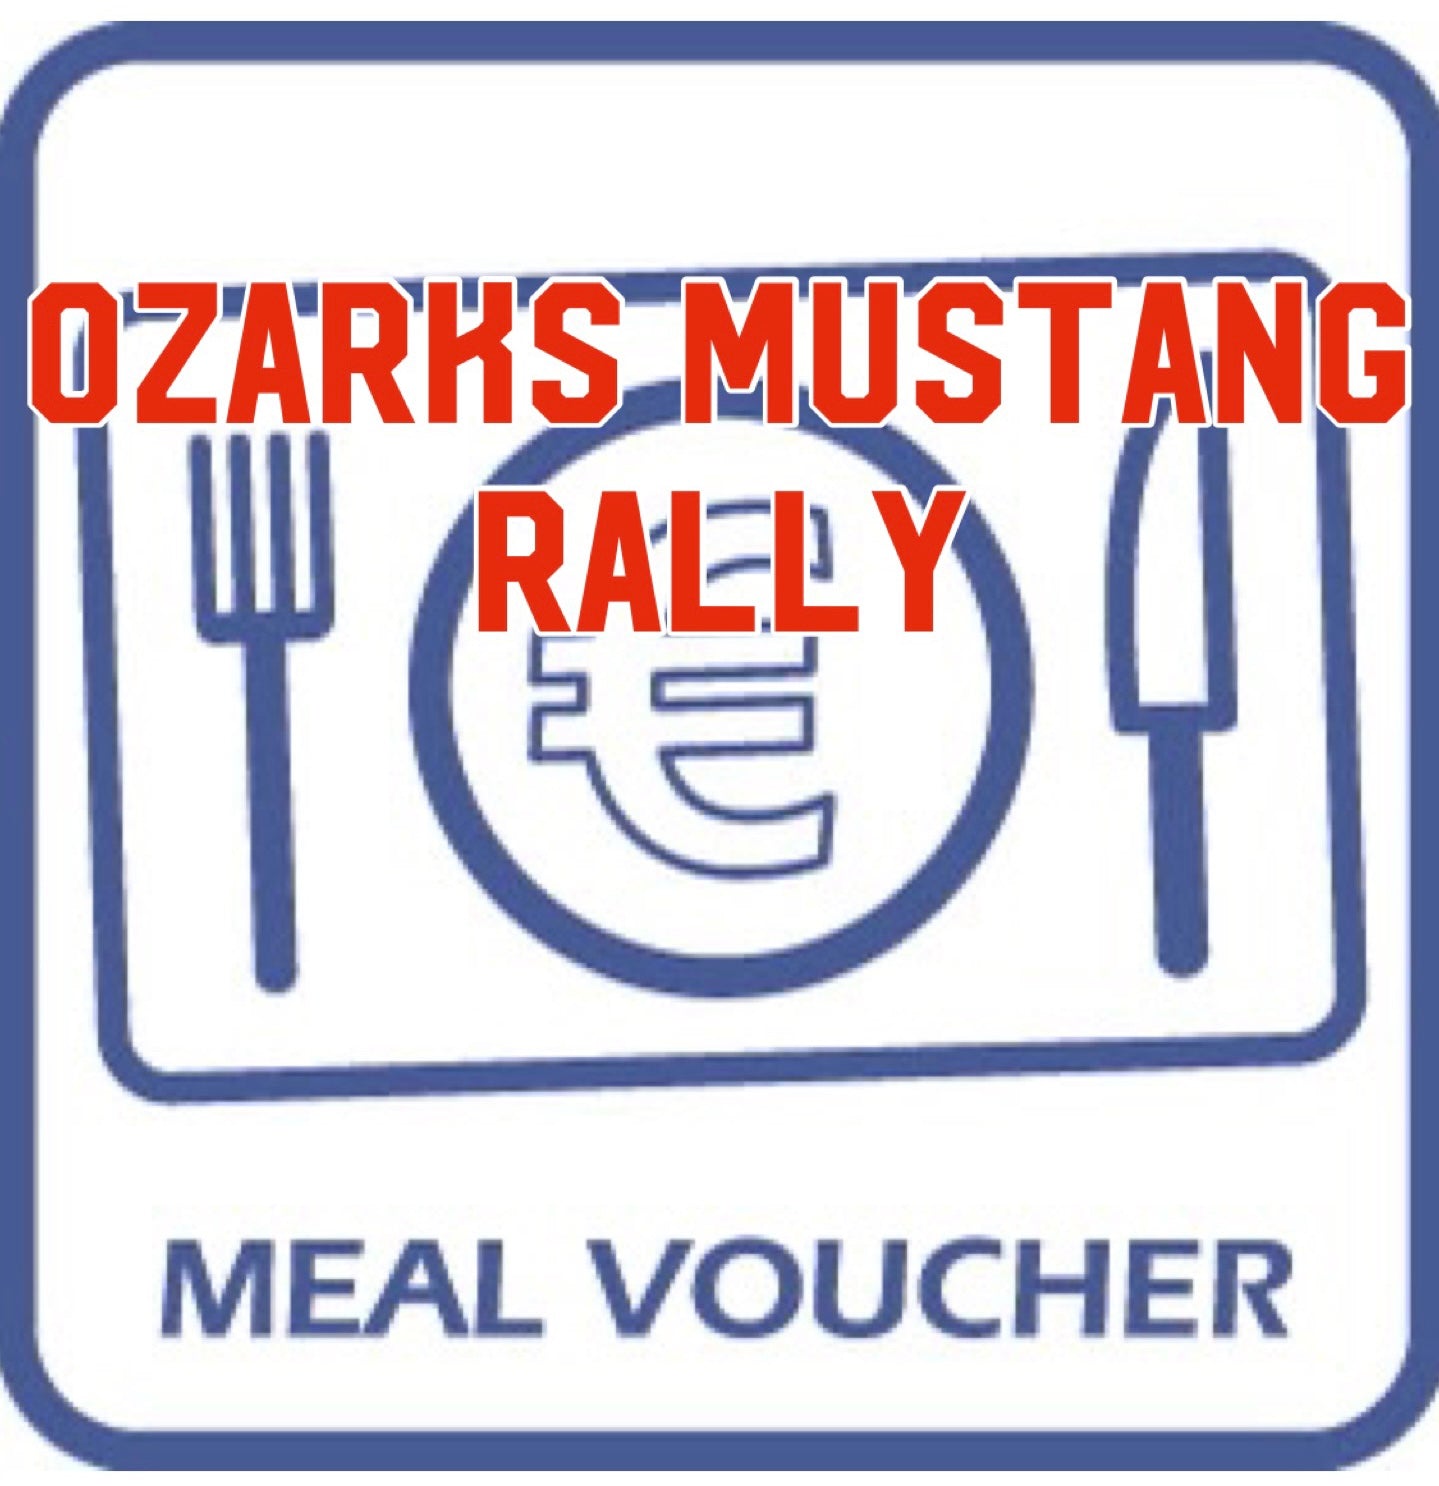 Ozarks  Mustang Rally - Meal Voucher